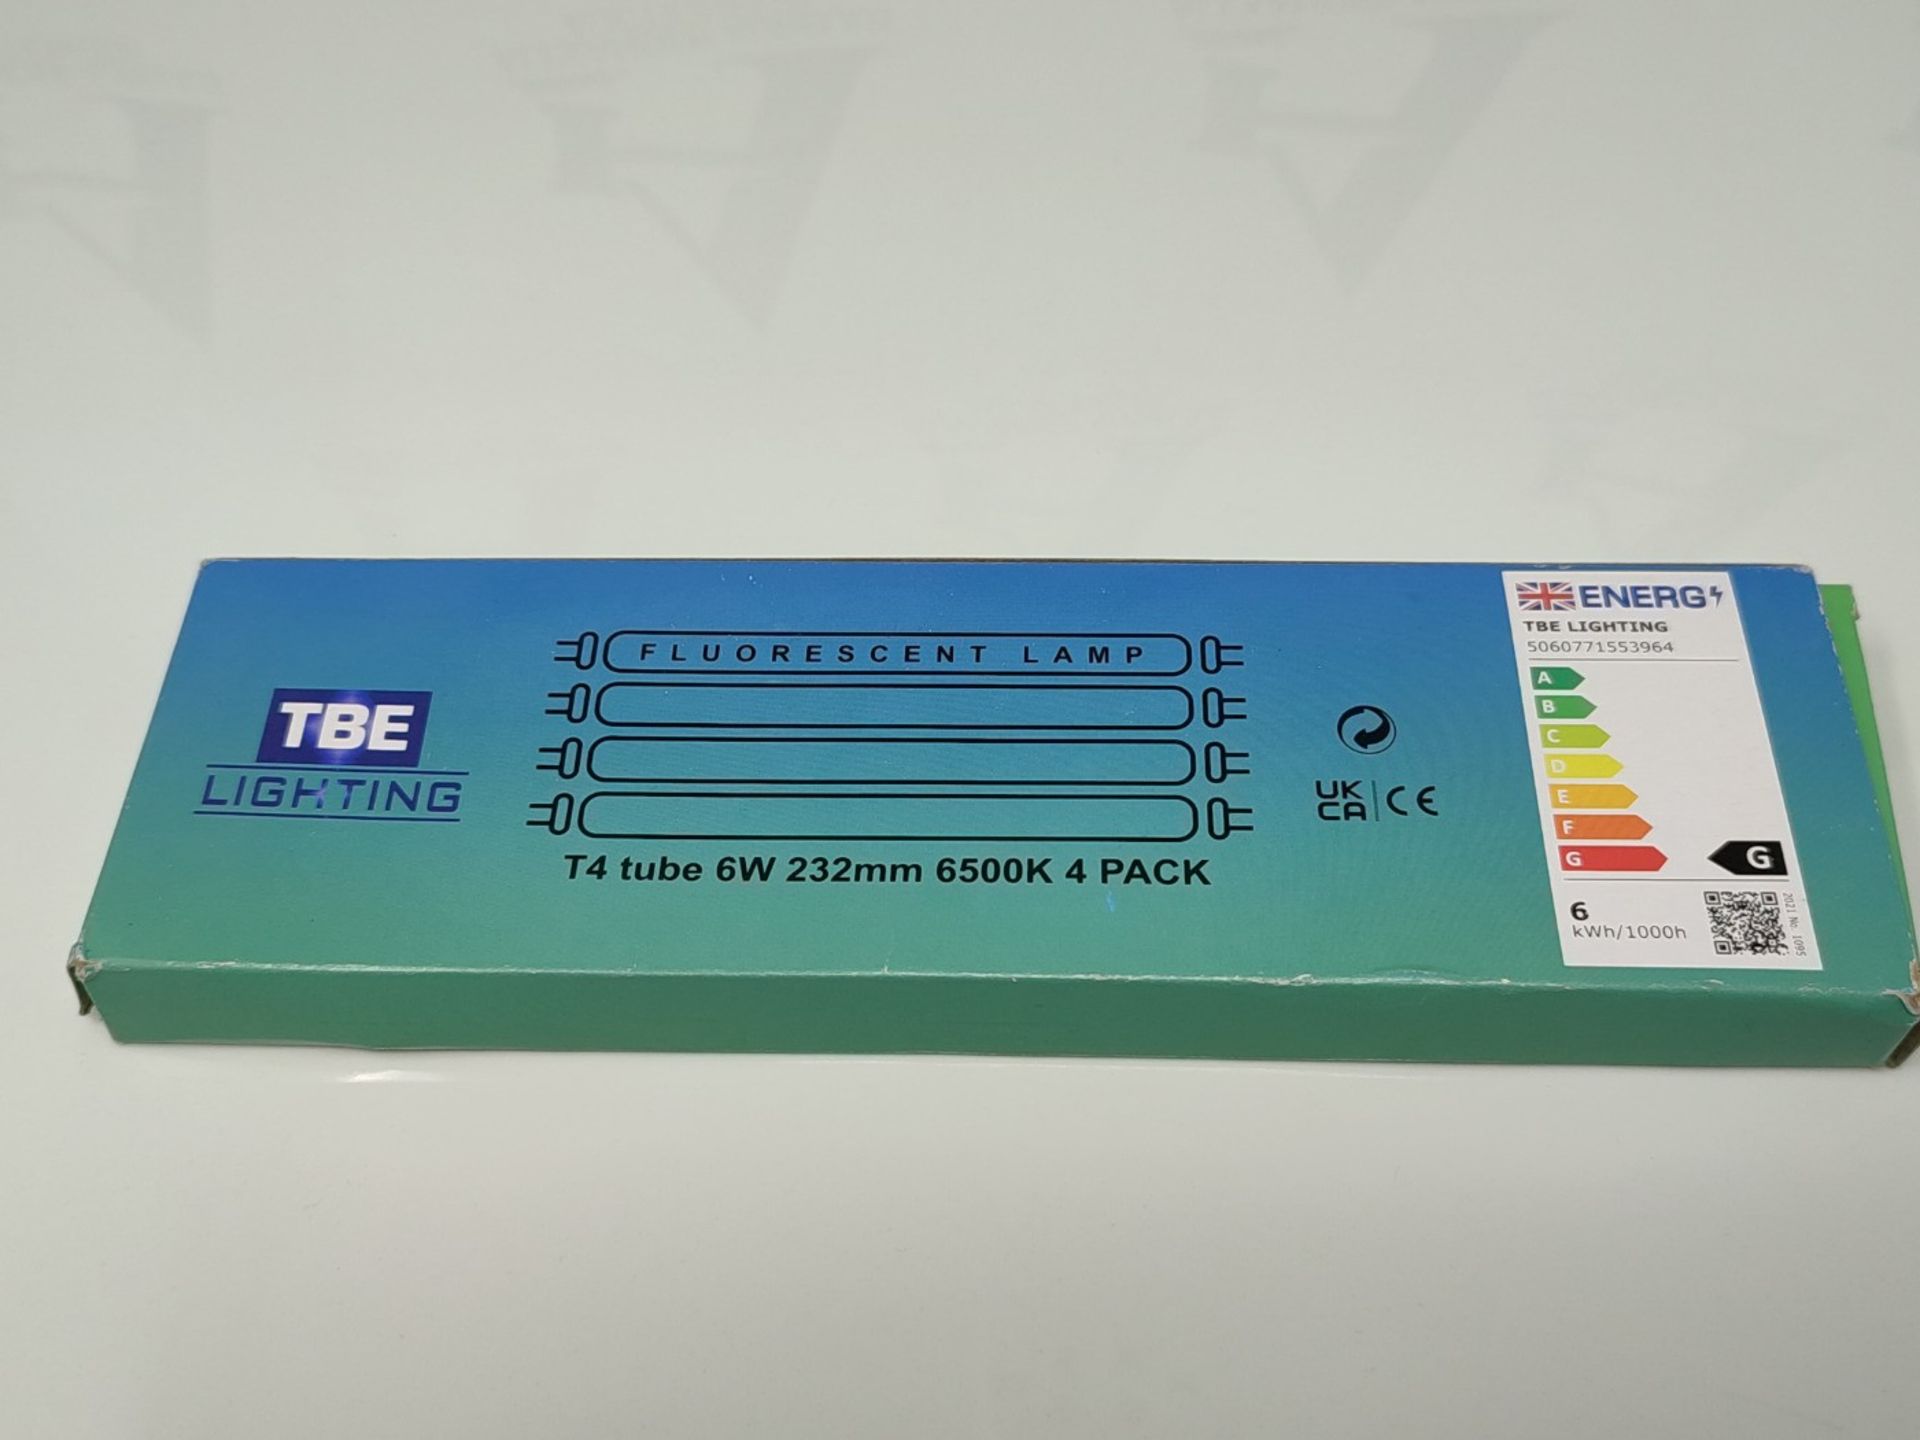 TBE LIGHTING T4 6w Fluorescent Tube Lamps 232mm - 4 Pack of CFL Bulbs - G5 2-Pin Base